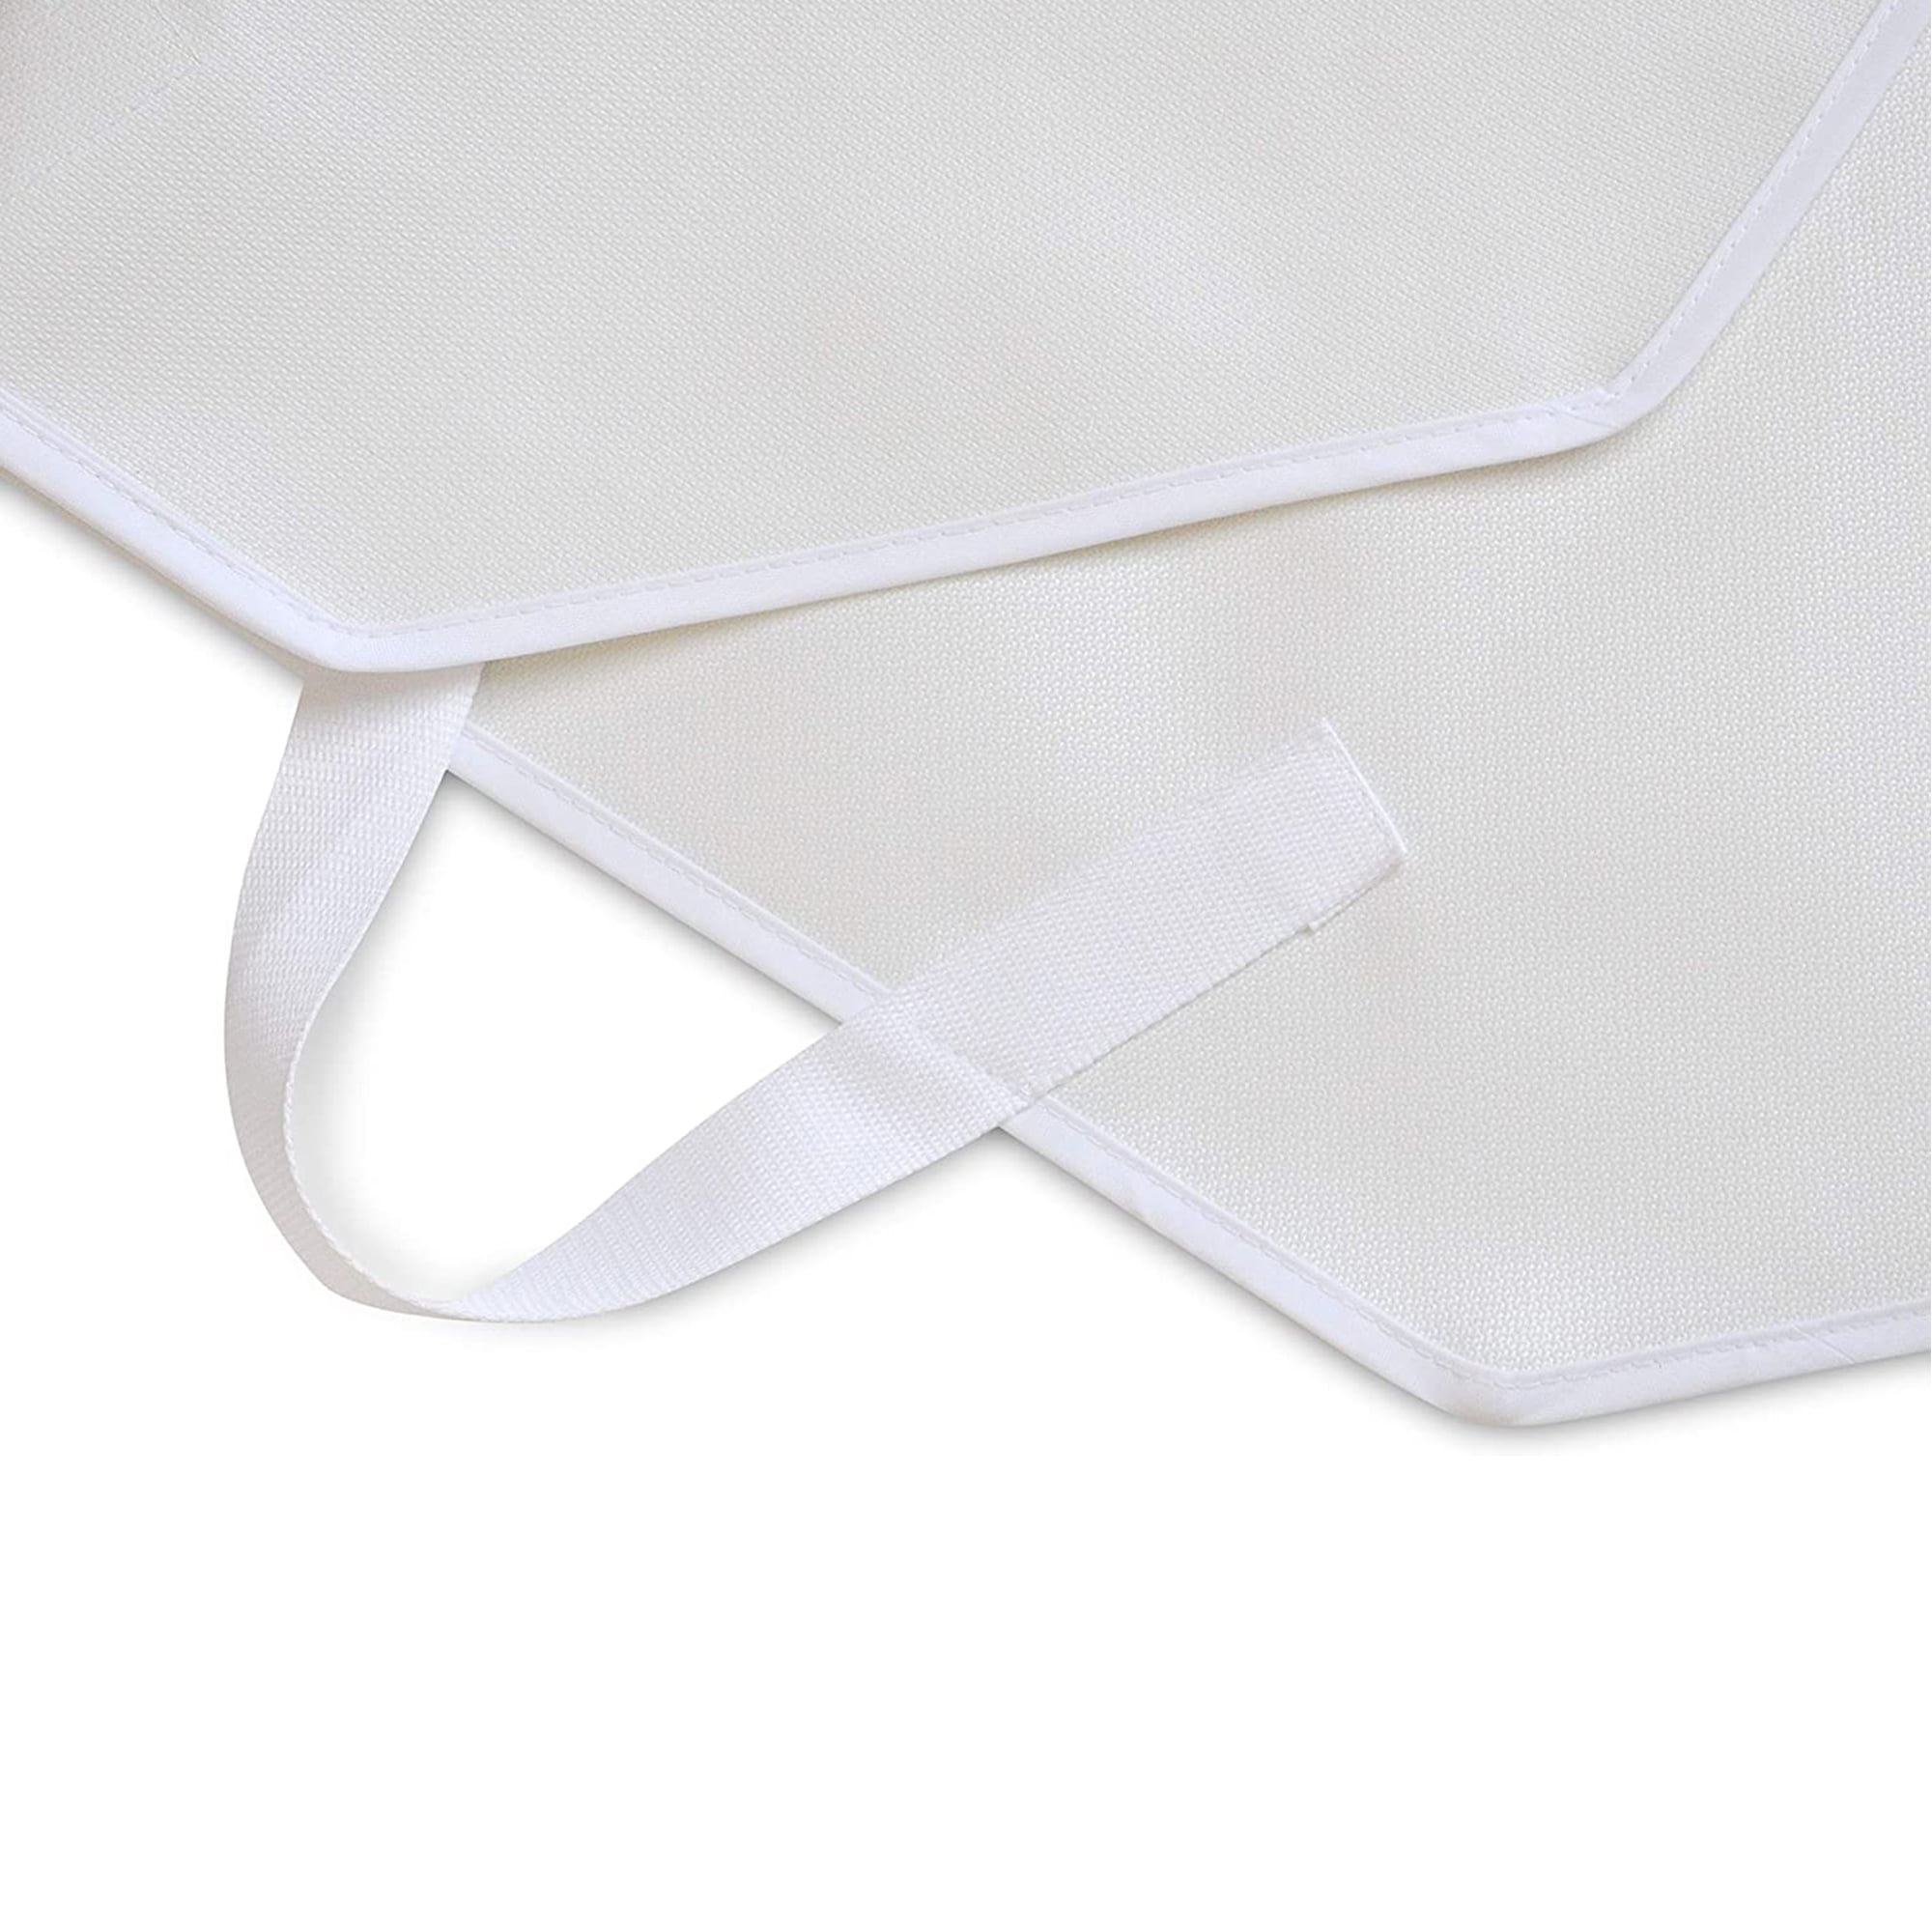 NYOrtho Heavy Duty Smoker’s Apron for Geri-Chair Bound Patients, Standard  White